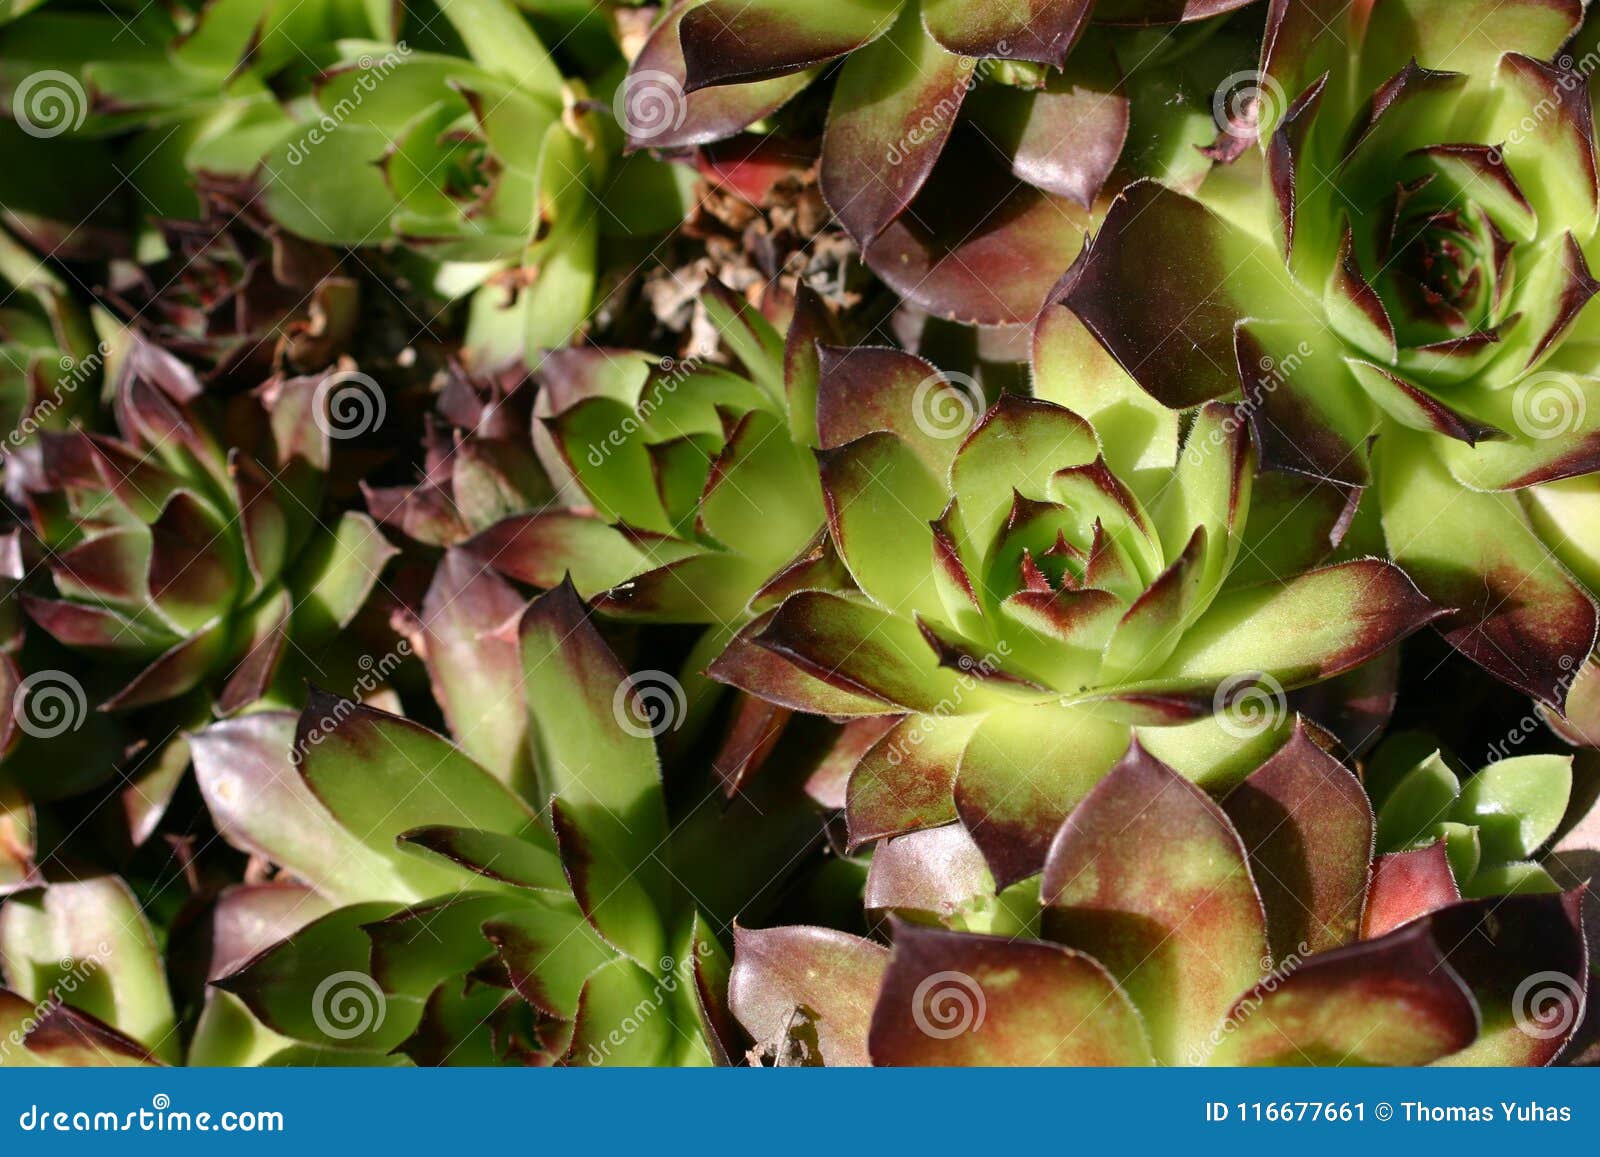 Blooming Succulent Garden Stock Image Image Of Life 116677661